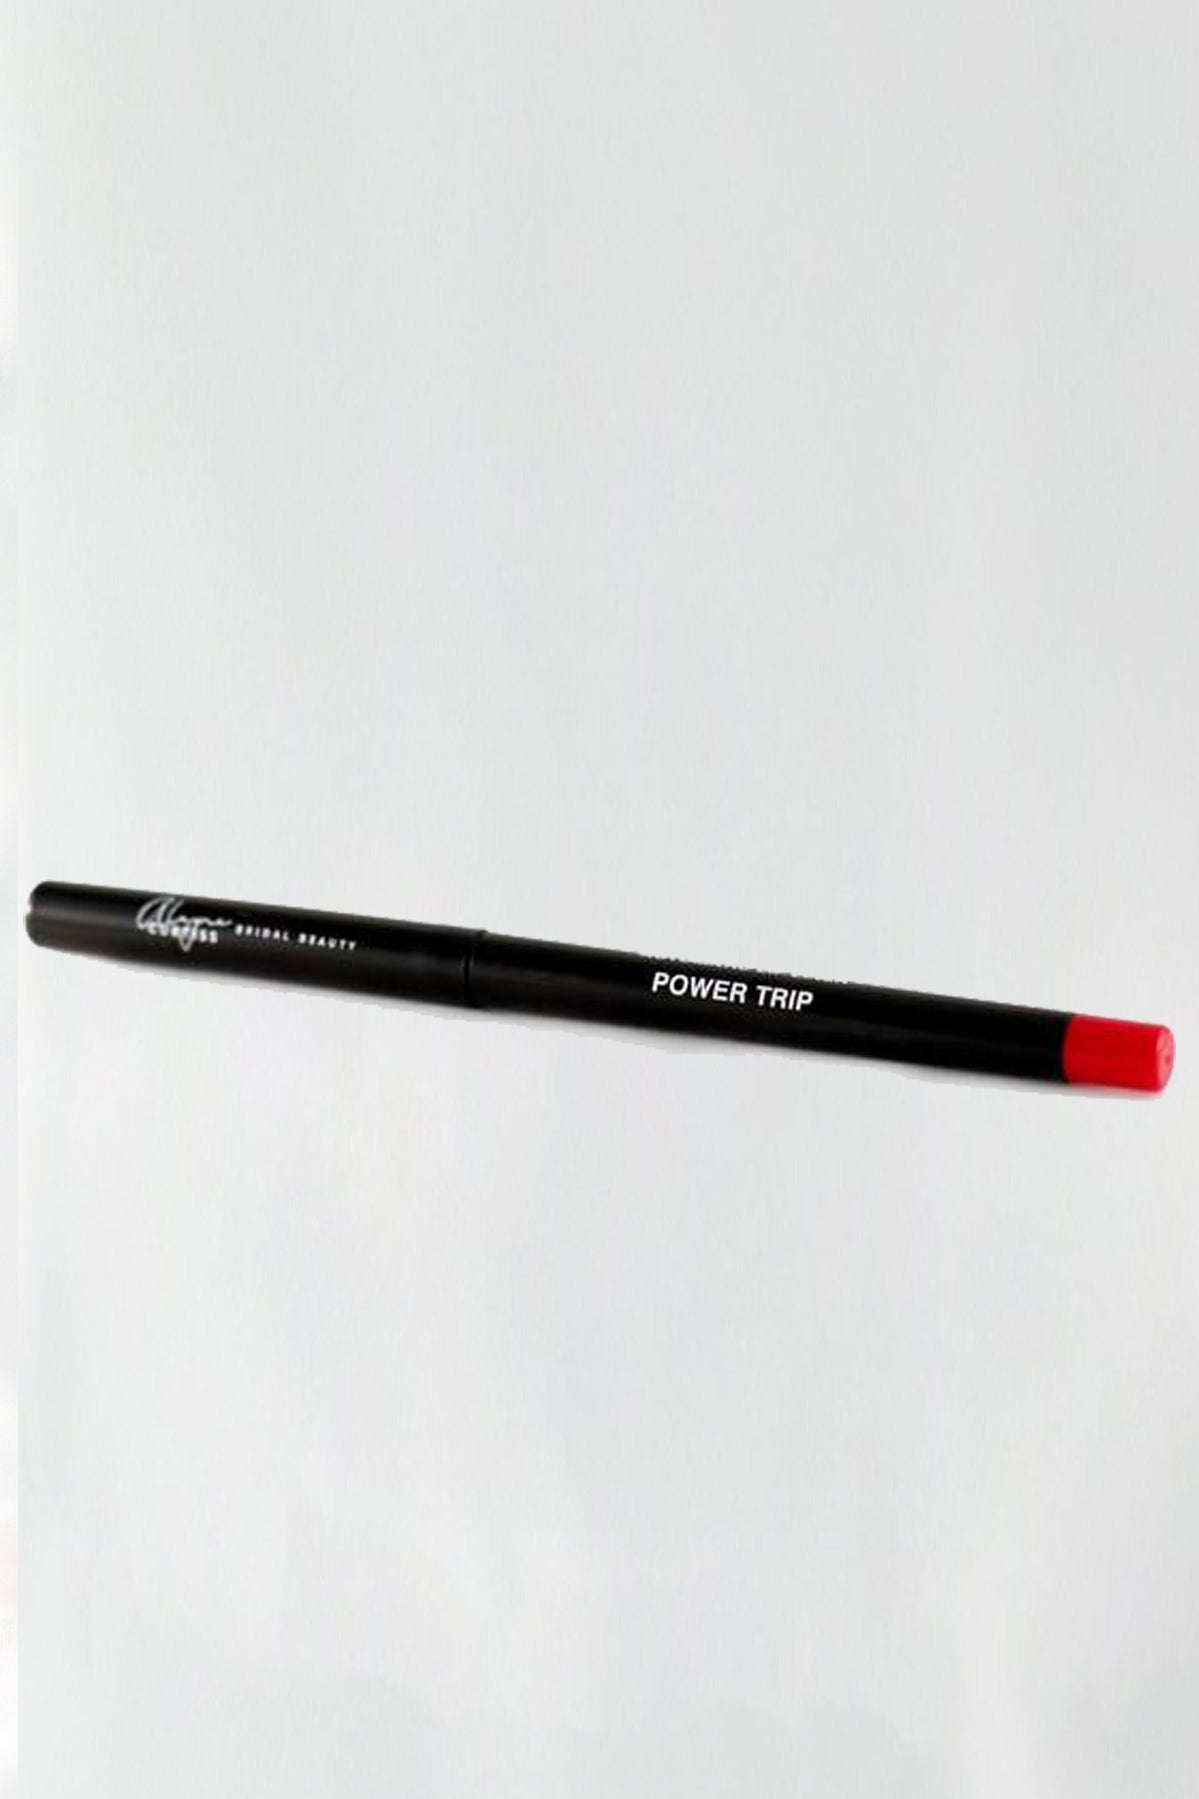 Power Trip Automatic Lip Liner